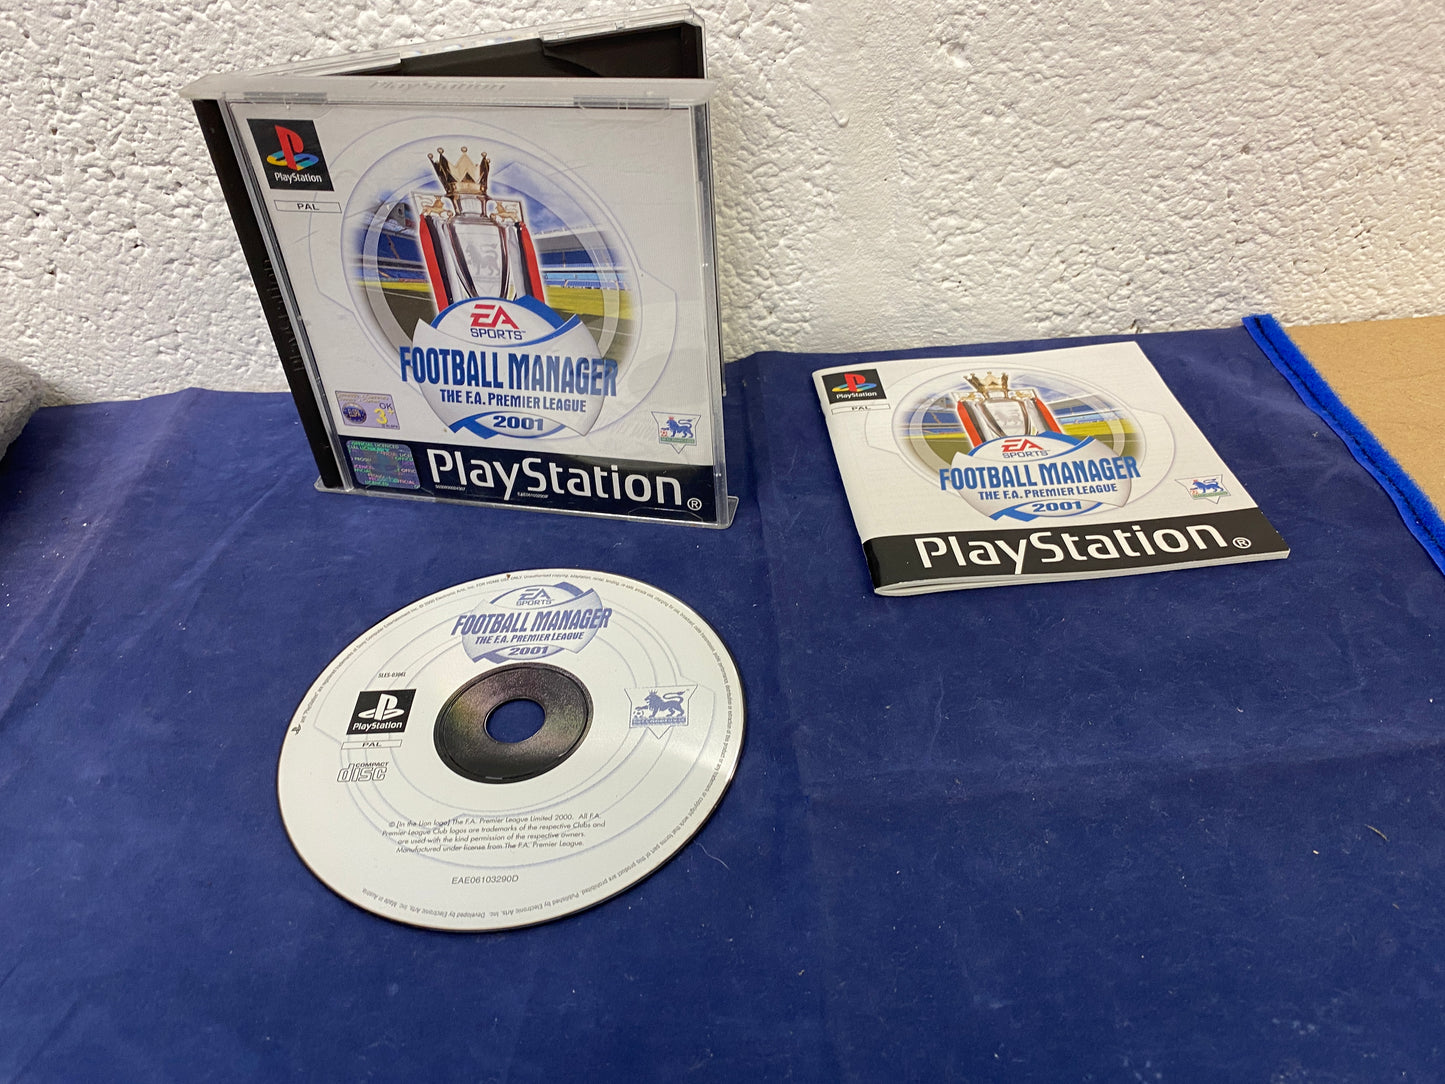 Football Manager the F.A Premier League 2001 Sony Playstation 1 (PS1) Game